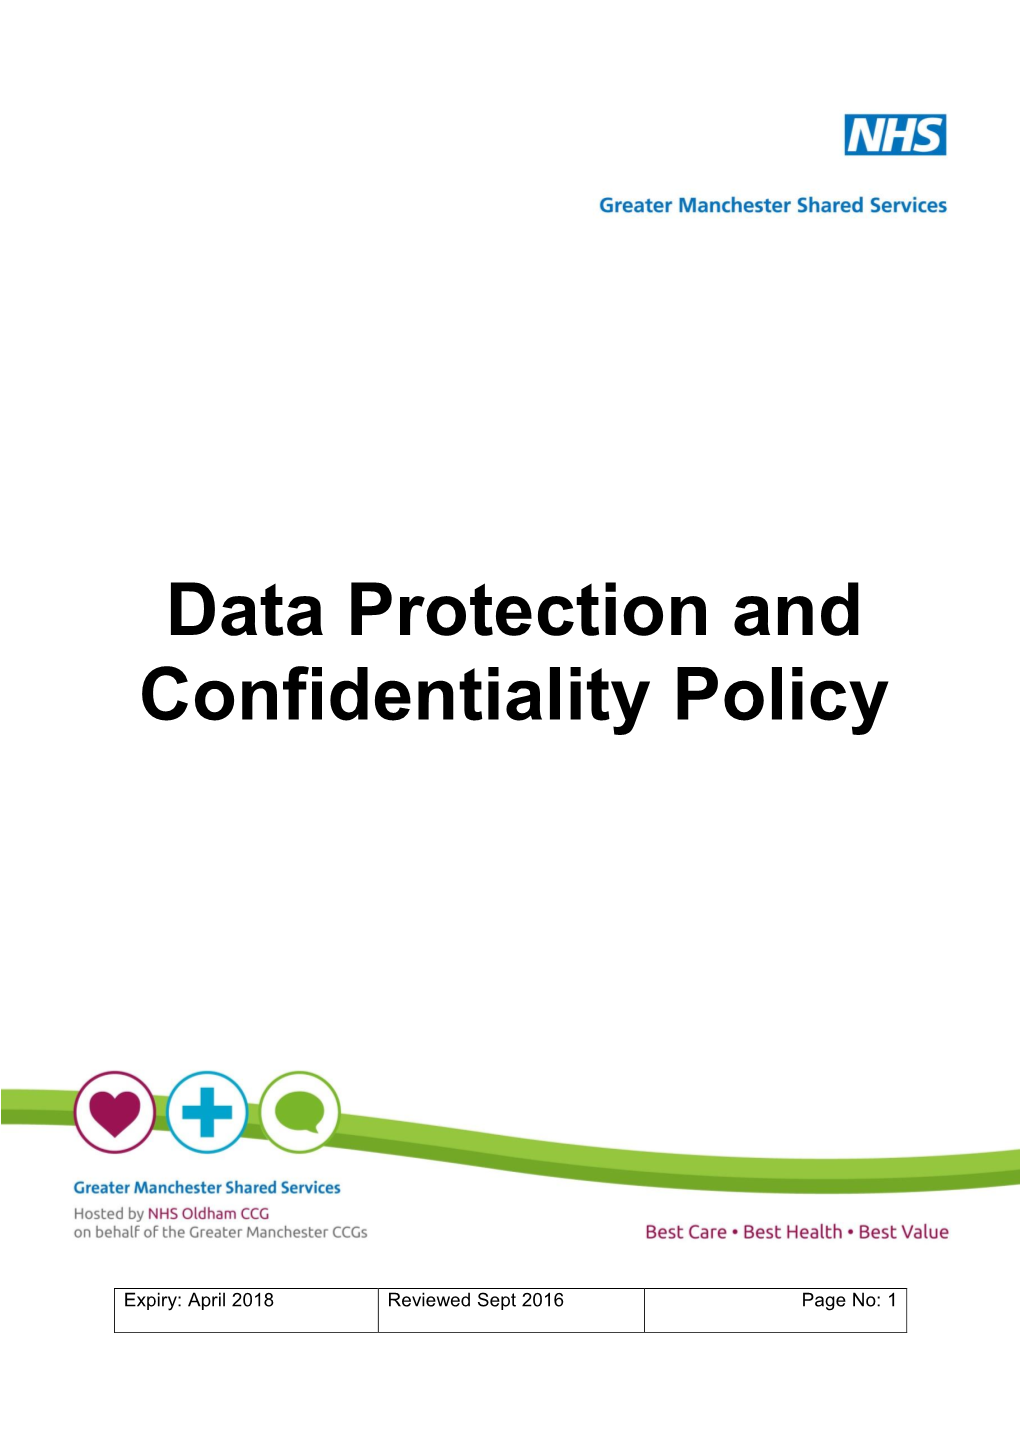 Data Protection and Confidentiality Policy